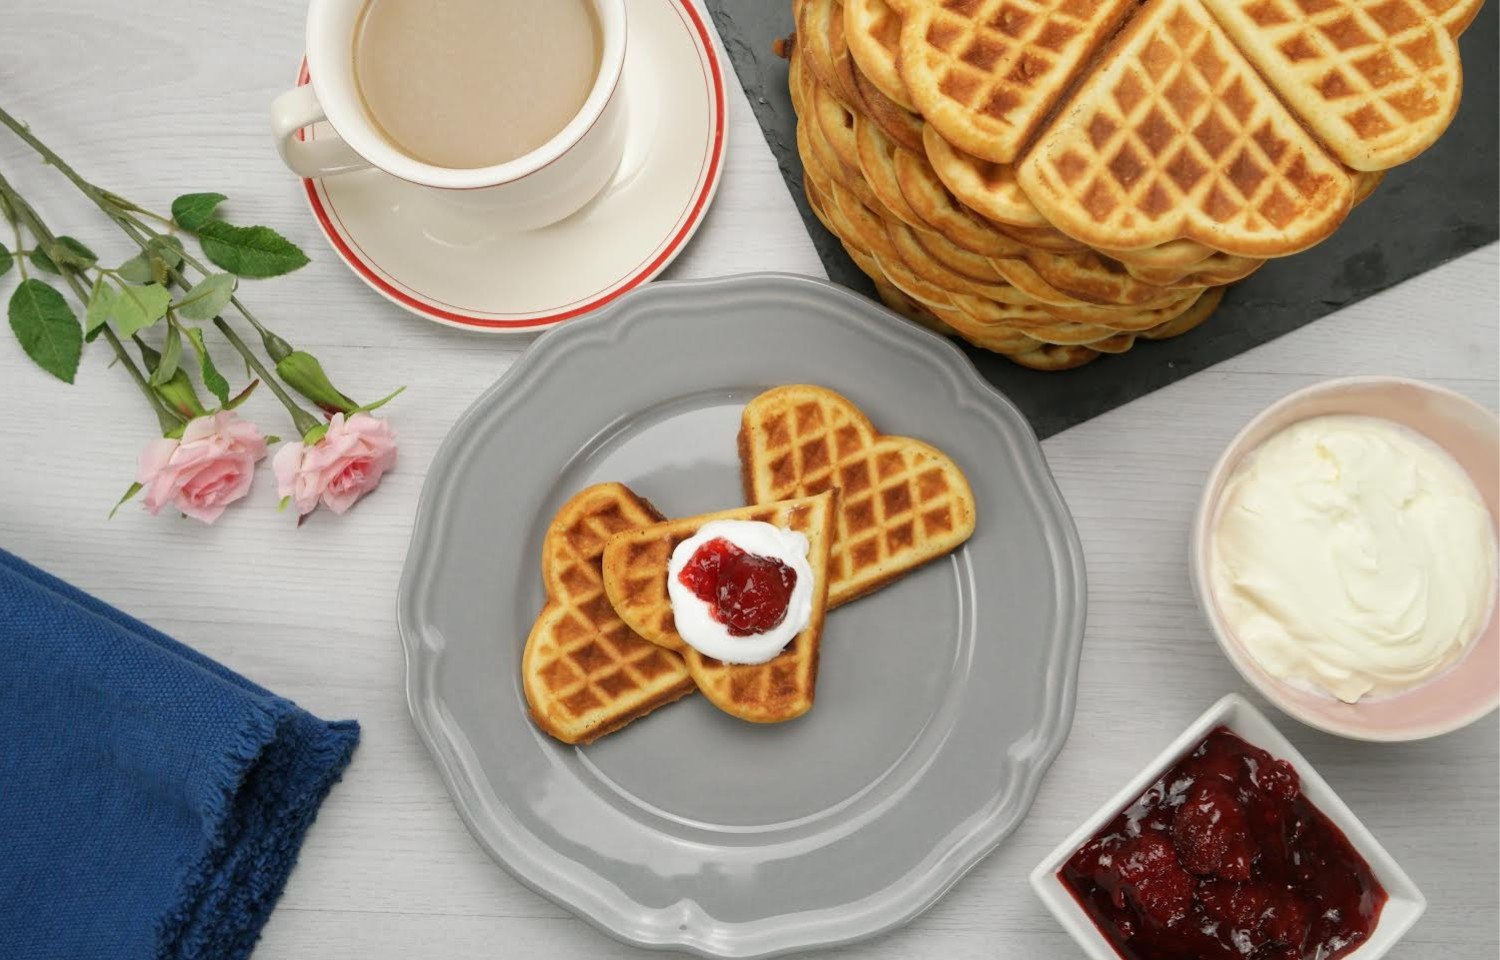 Norwegian waffles served in the traditional heart shape.